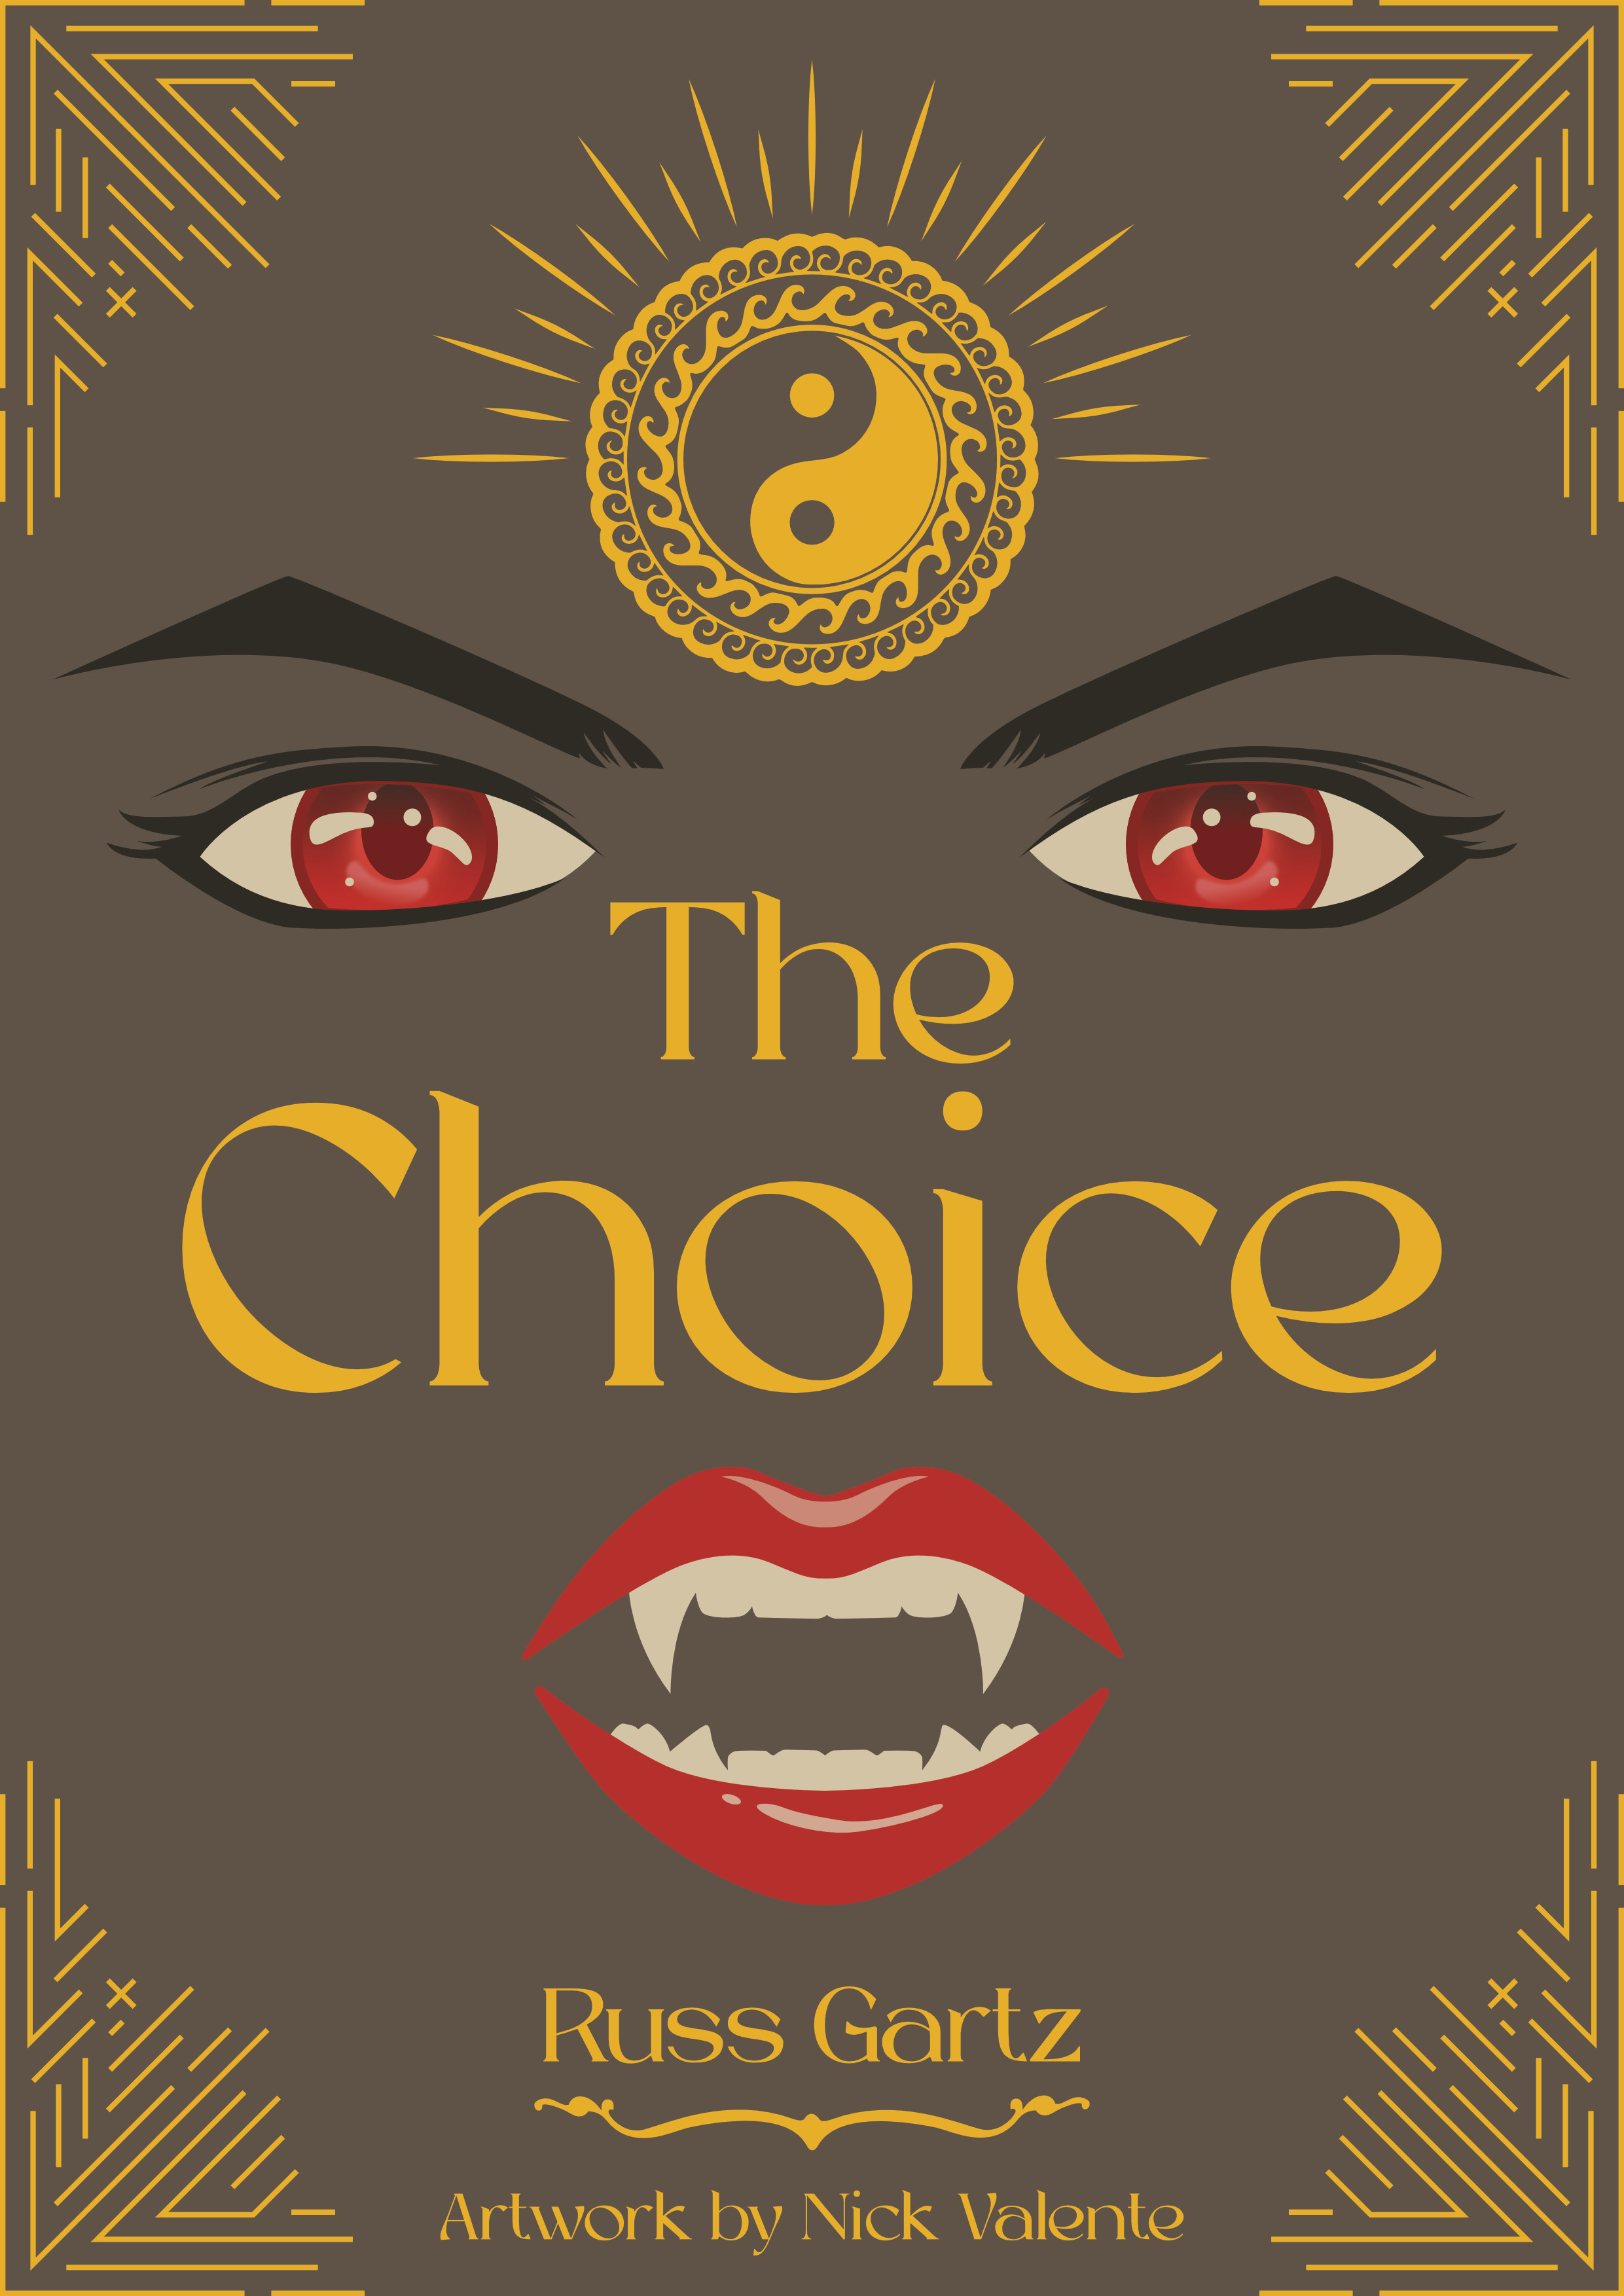 The Choice book cover final design.